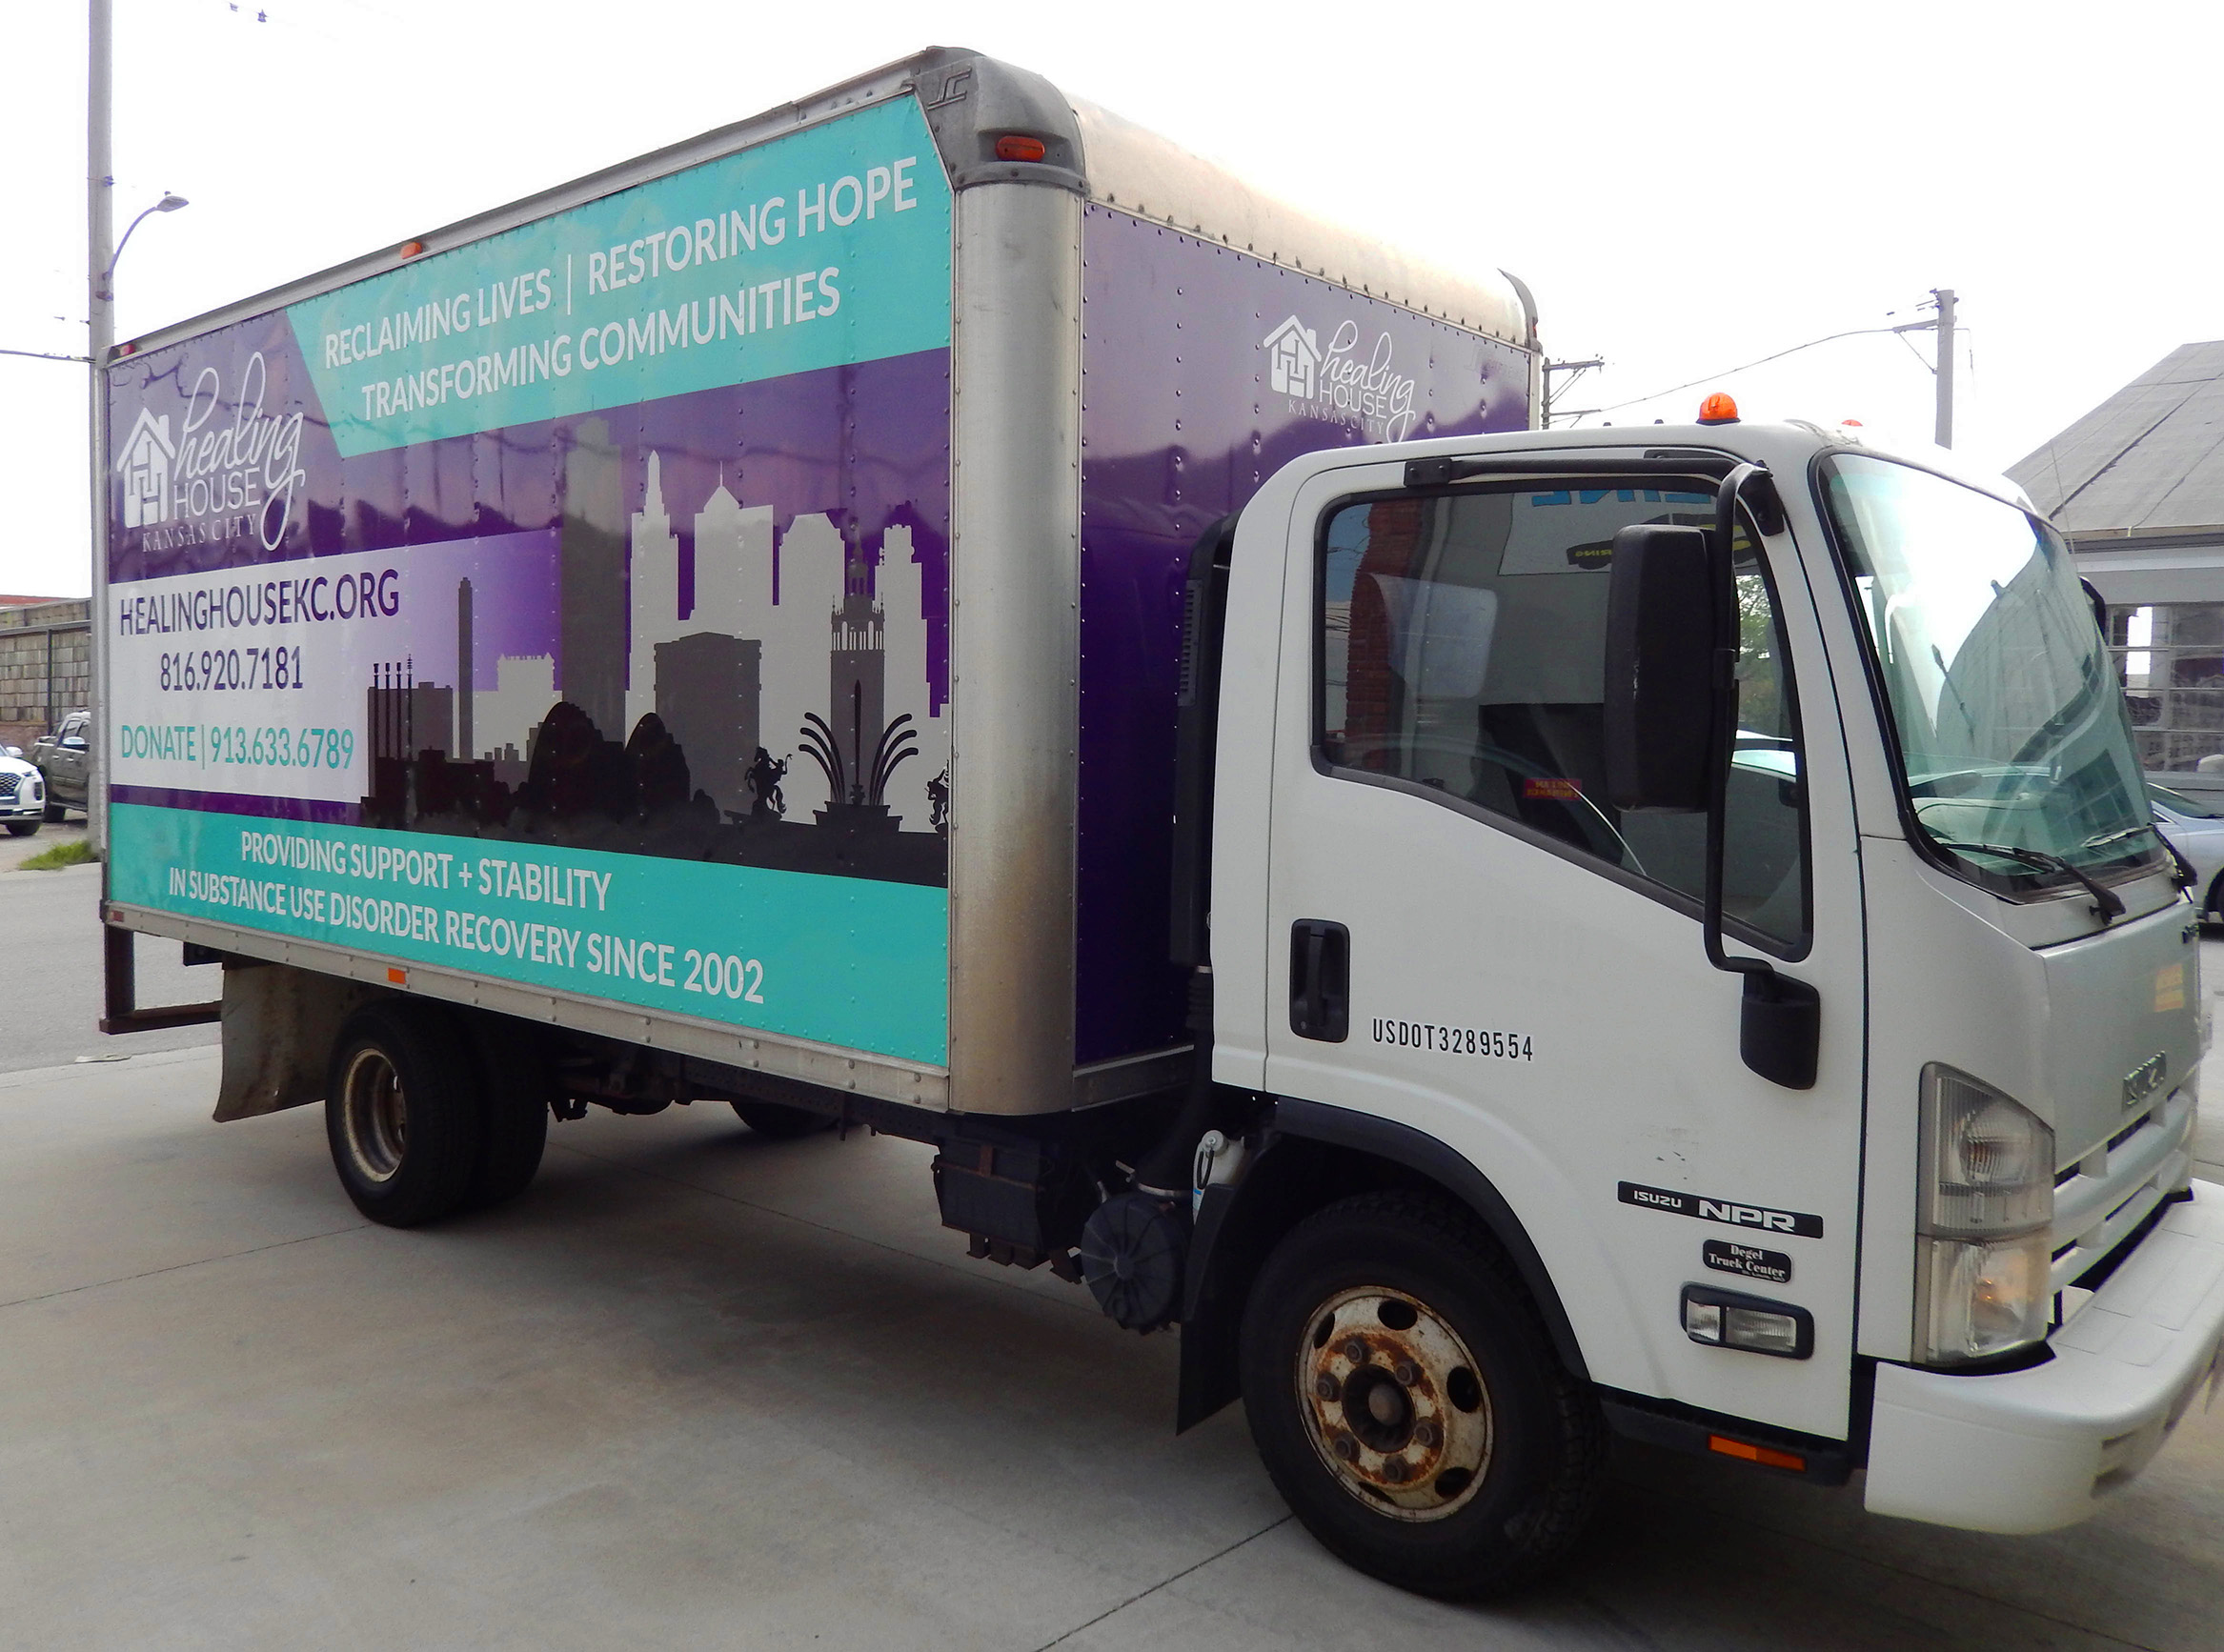 Get Experienced Service with Box Truck Wraps from Streamline Print and Design.